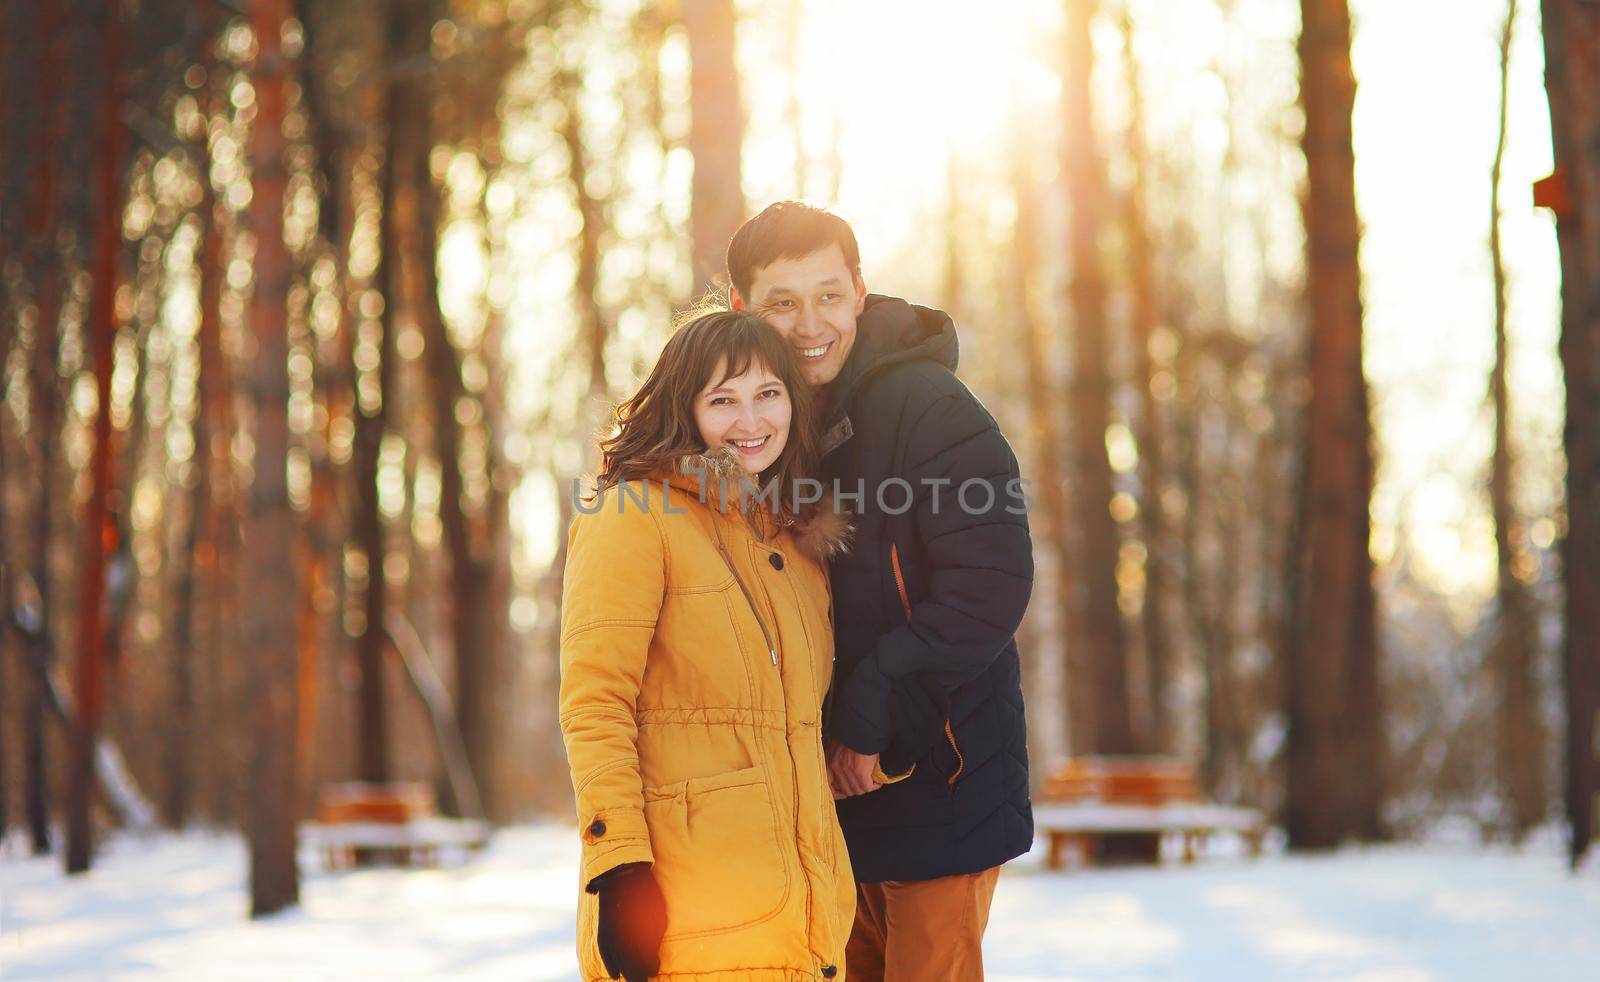 Warm winter portrait of young interracial smiling couple on a walk in the forest.